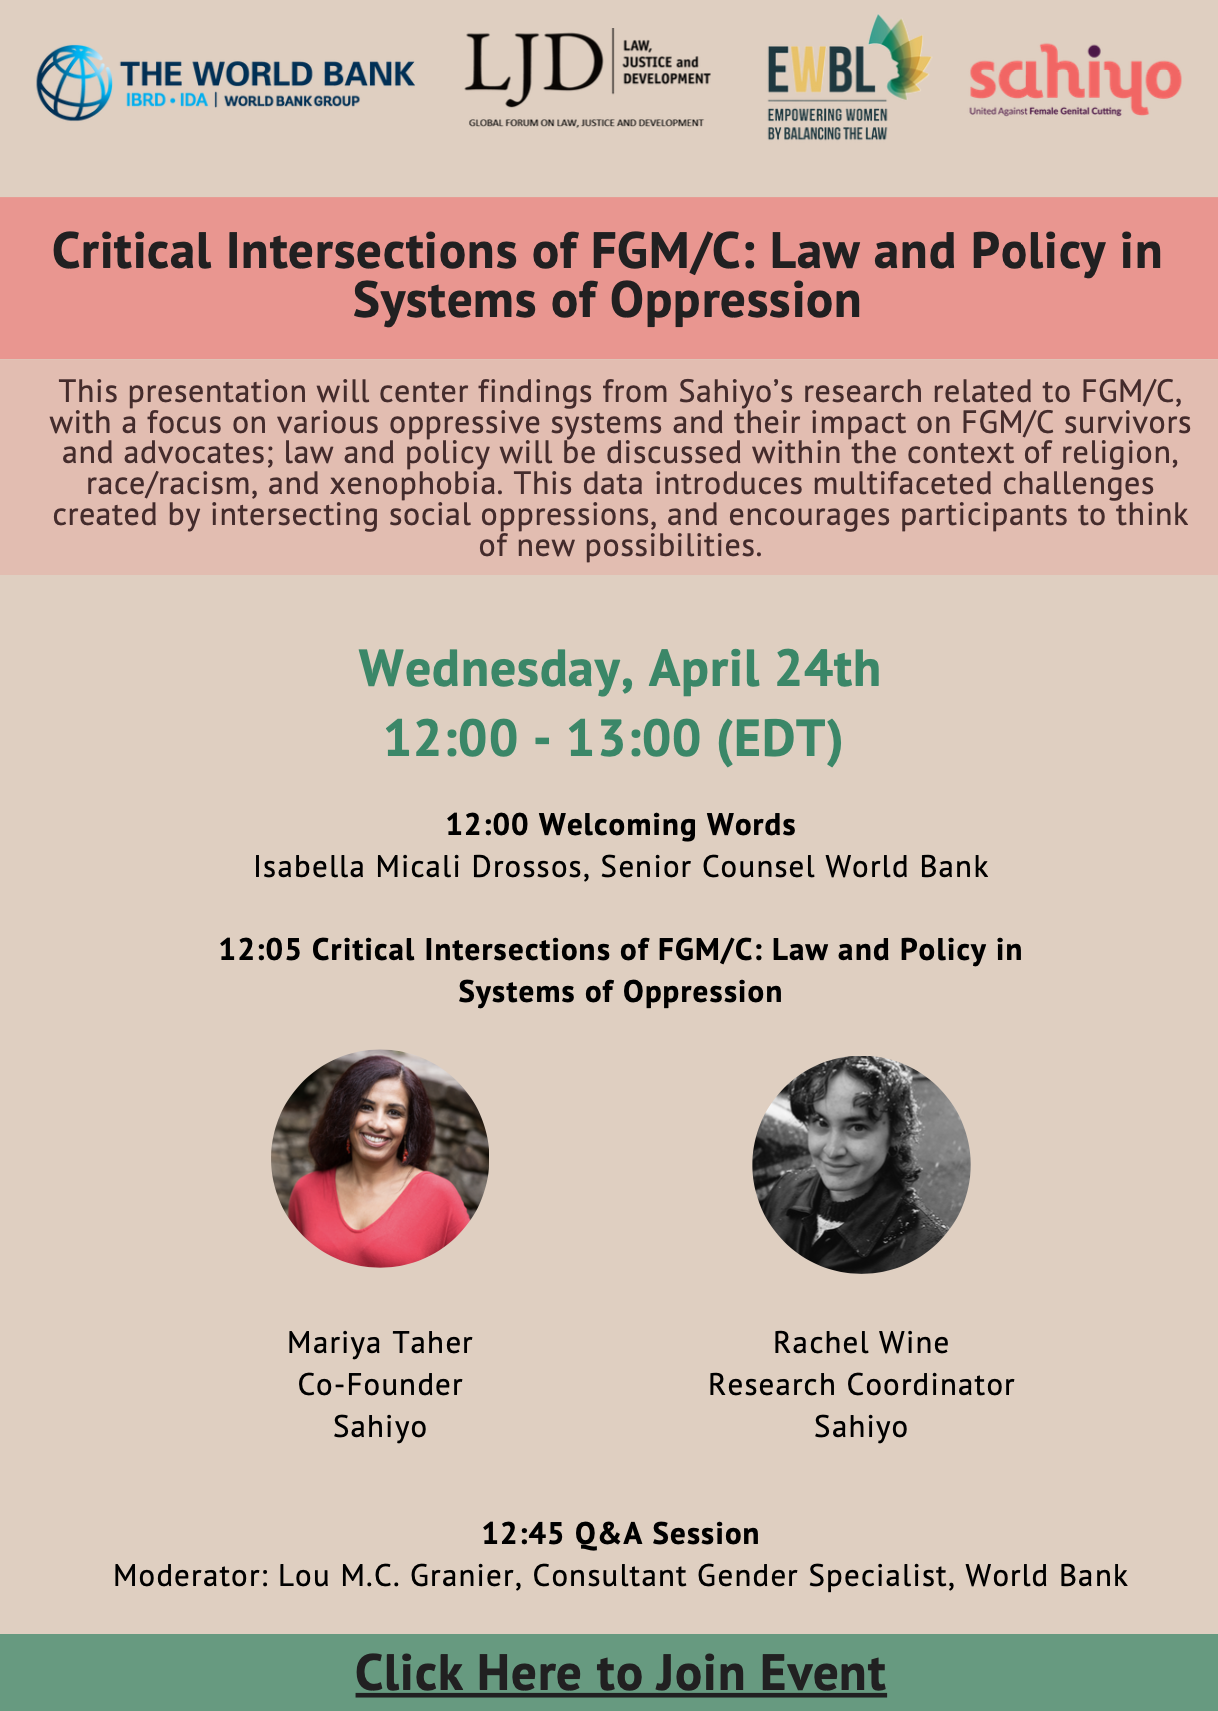 Critical Intersections of FGM/C: Law and Policy in Systems of Oppression Presentation